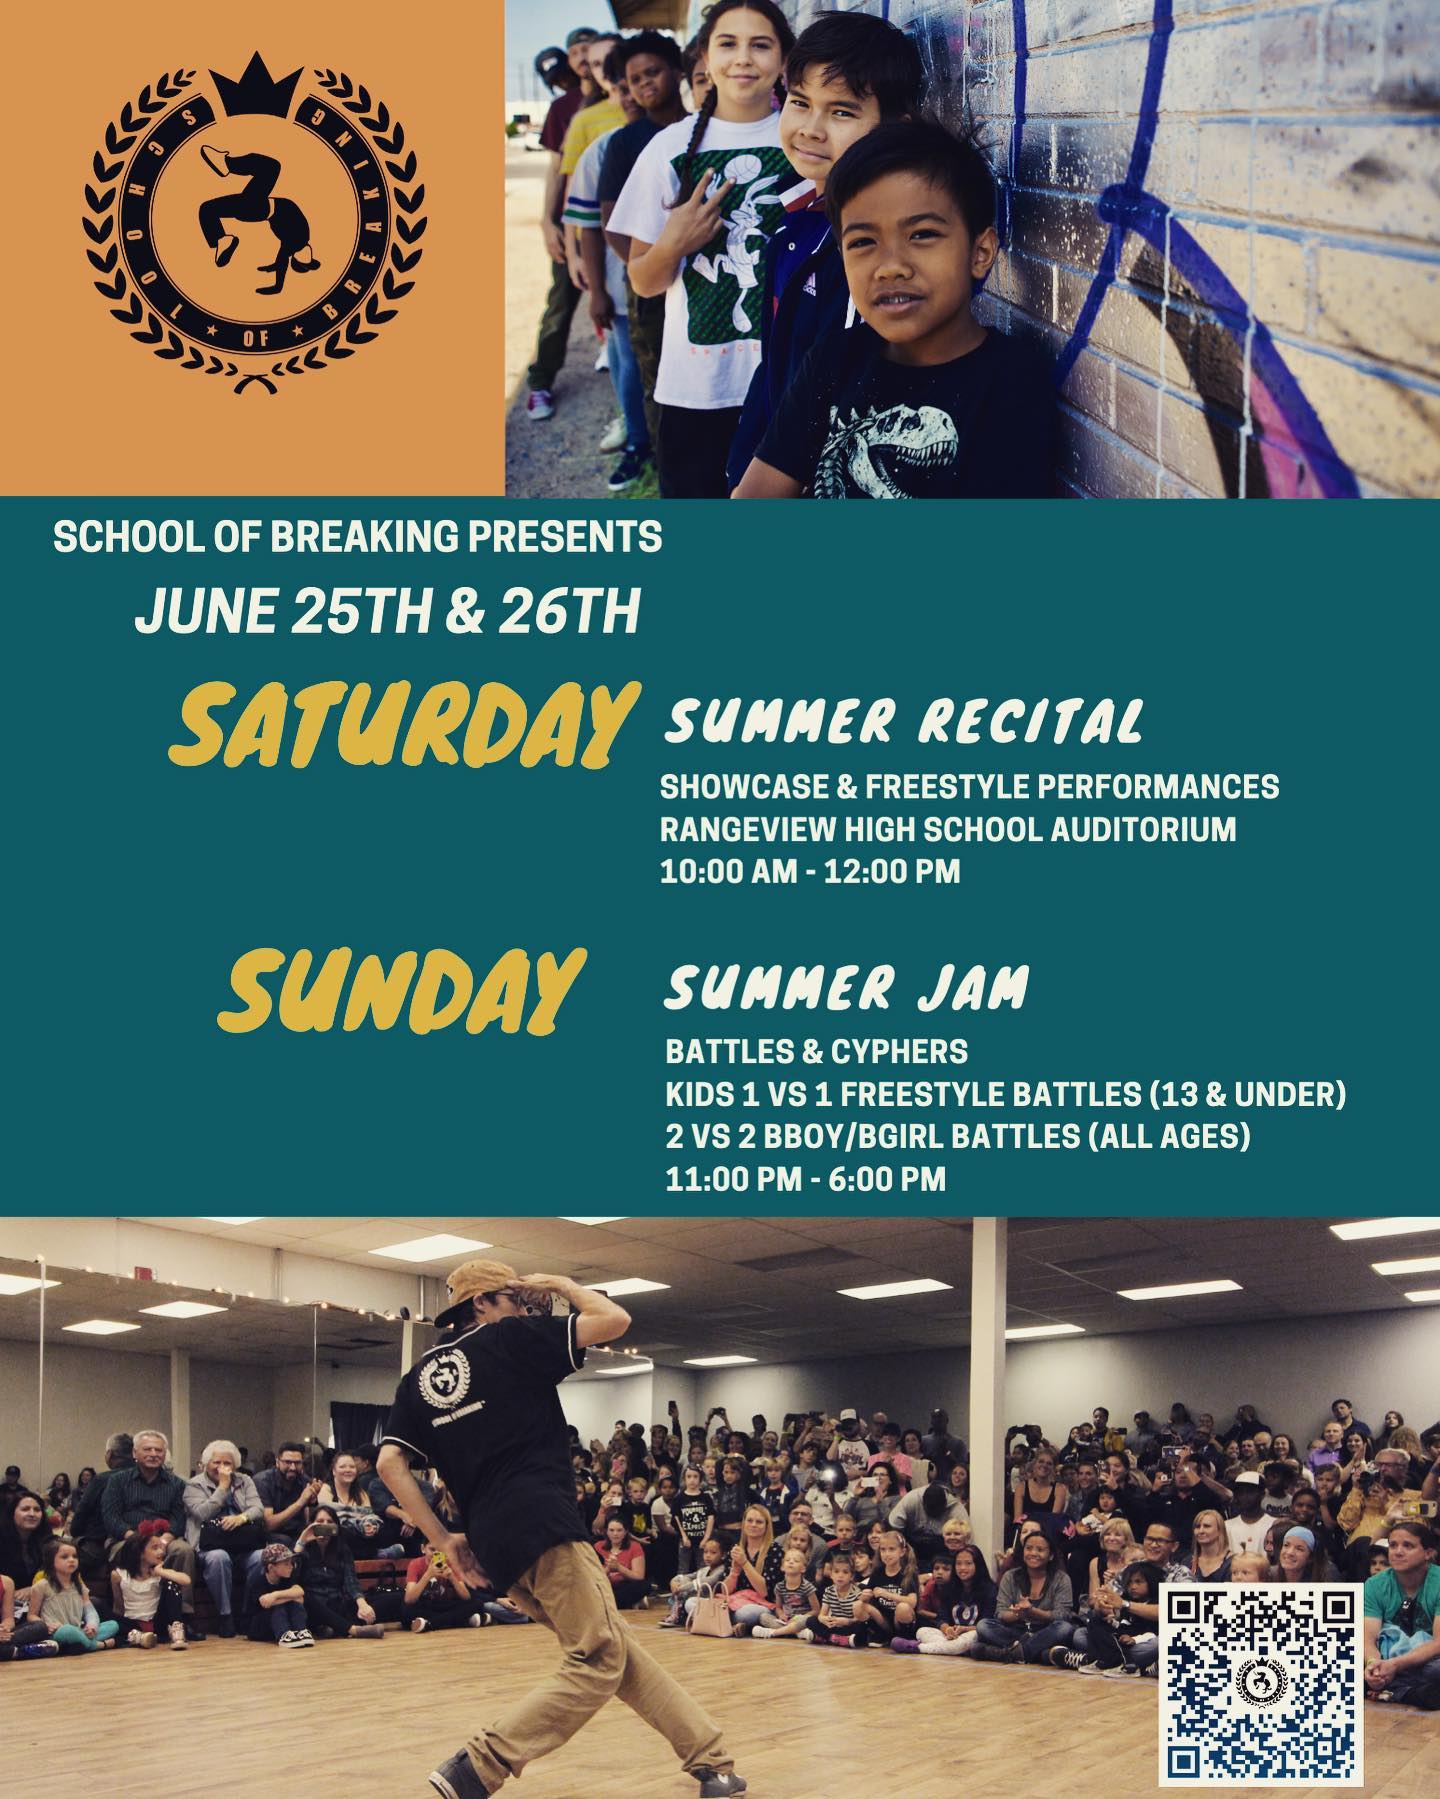 It’s creeping up we can’t wait to celebrate with all of our students, families, friends and CO Hip-Hop community😎🎉✌️

School Of Breaking Recital & Summer Jam going down come join the festivities, hope to see you there 💯🎶🙌

SOB Recital 👉 Saturday, June 25th at Rangeview High School 

Summer Jam 👉 Sunday. June 26th in the SchoolYard

Tickets now on sale, click the link in bio to purchase 🎟

#schoolofbreaking #HipHop #dance #culture #bboy #bgirl #summerjam #recital #expressfreely #peace #love #unity #havingfun